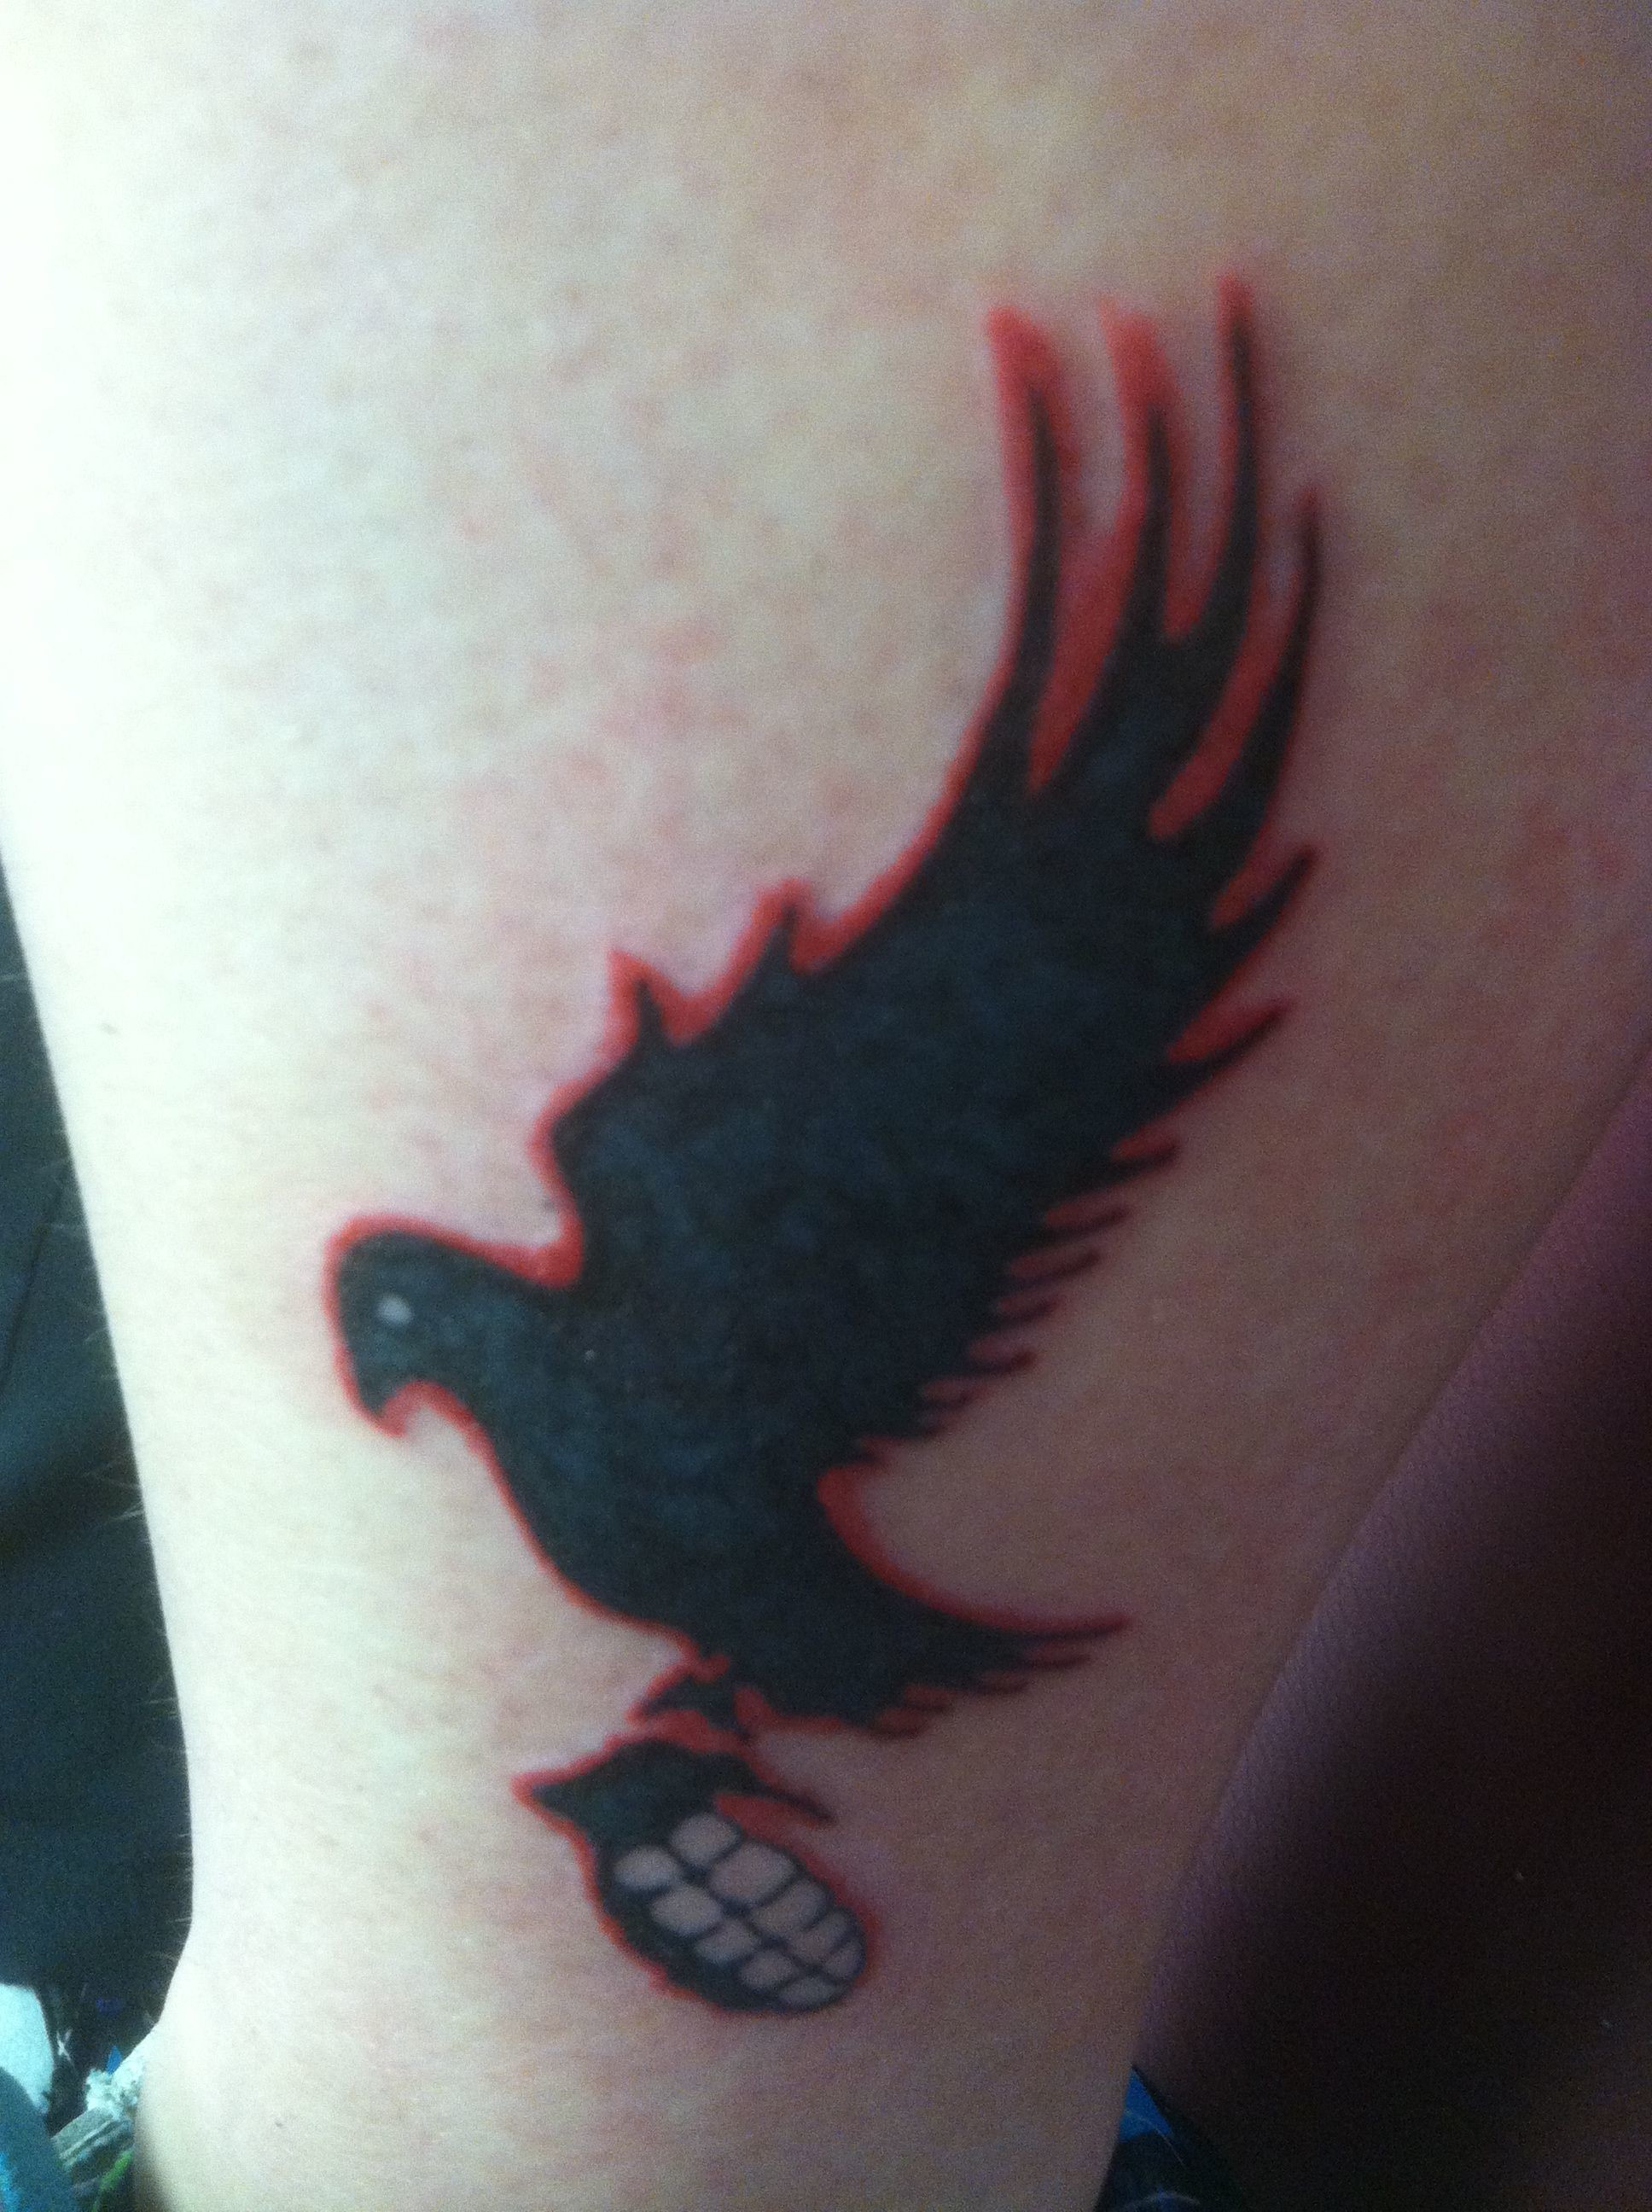 1936x2592 My dove and grenade Hollywood Undead leg tattoo!